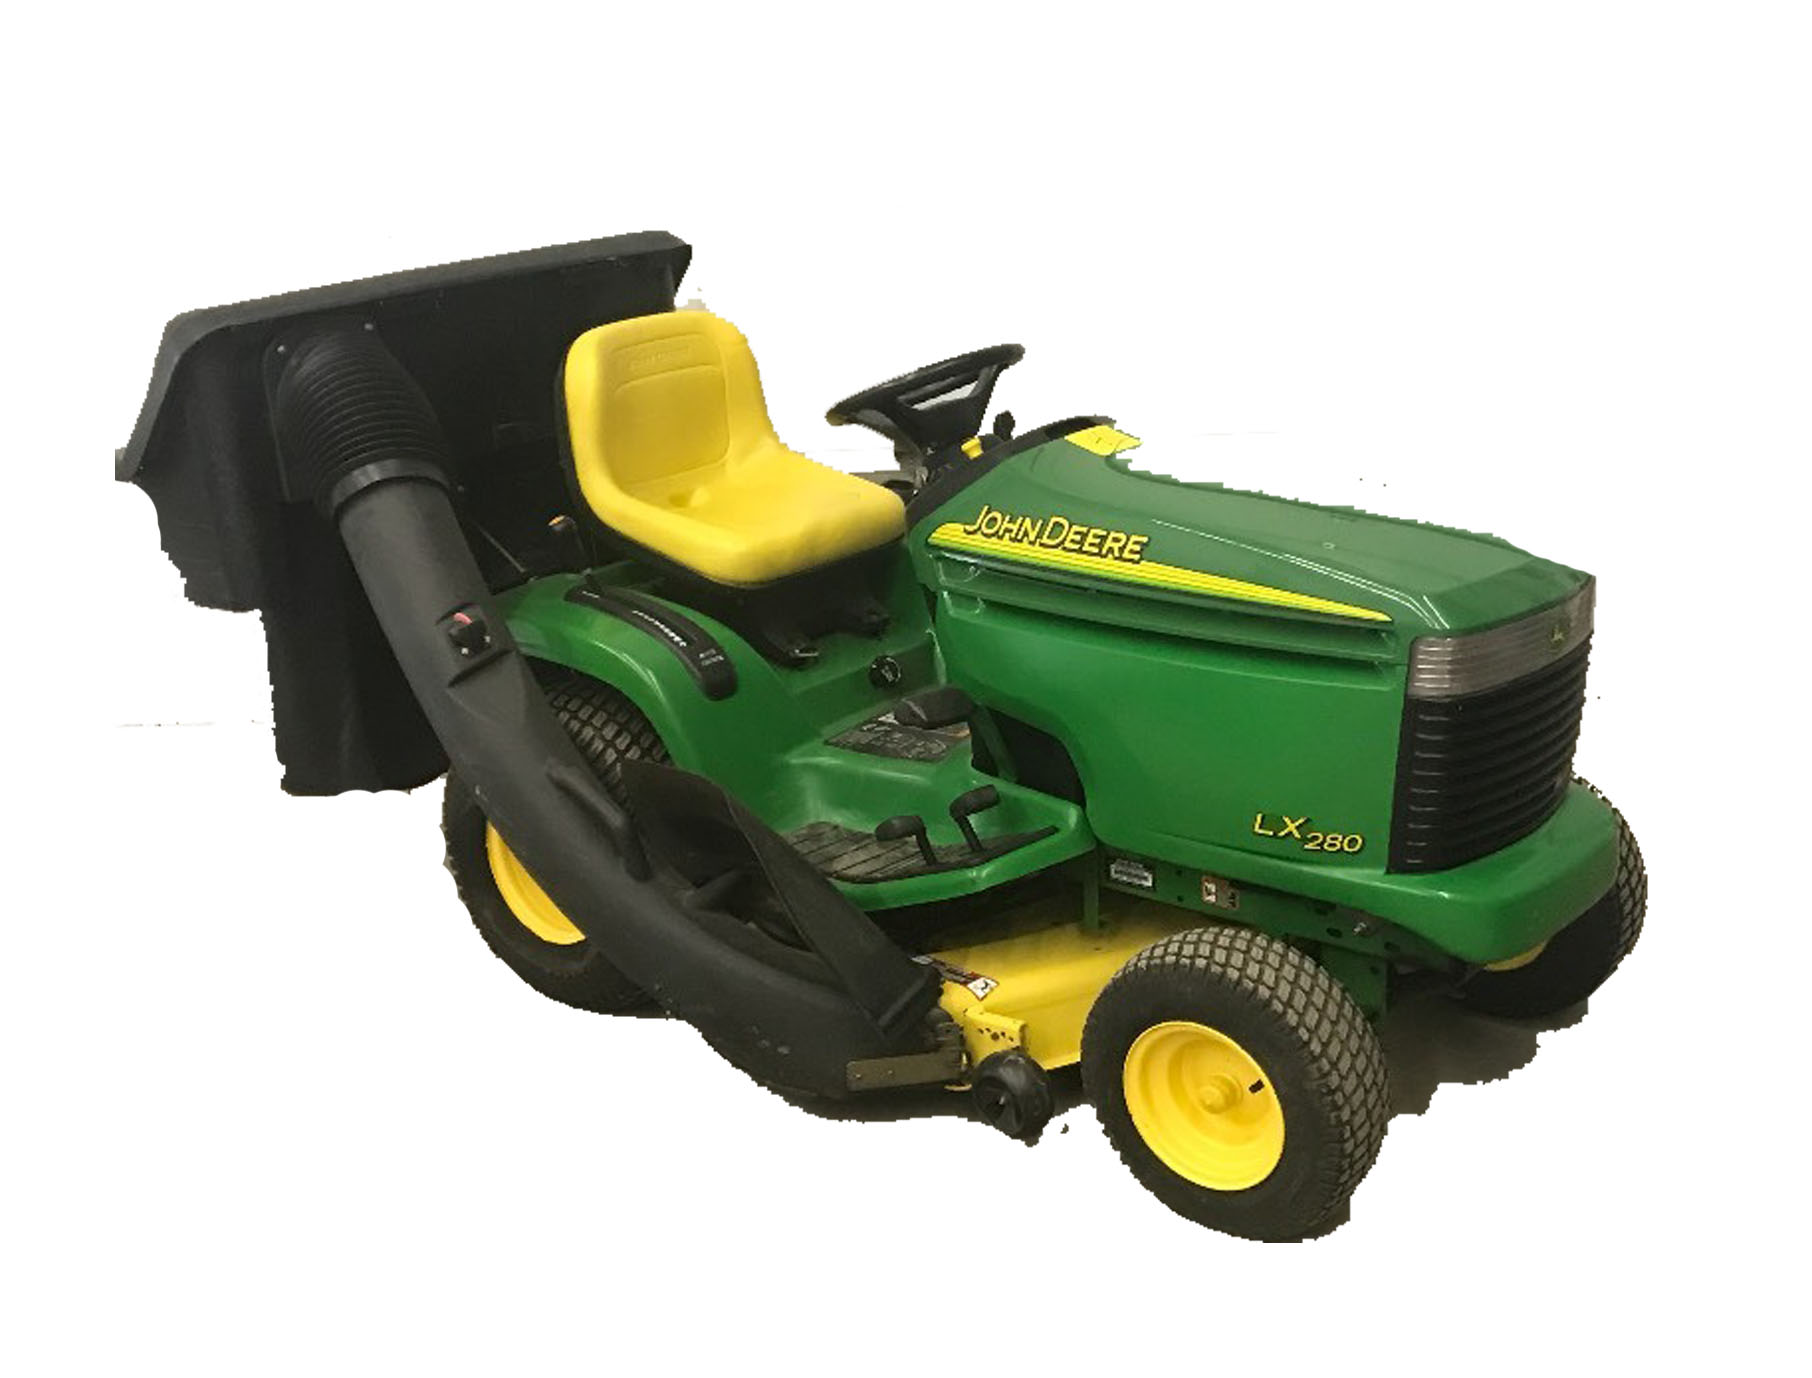 John Deere LX280 Lawn Tractor Price Specs Category Models List Prices